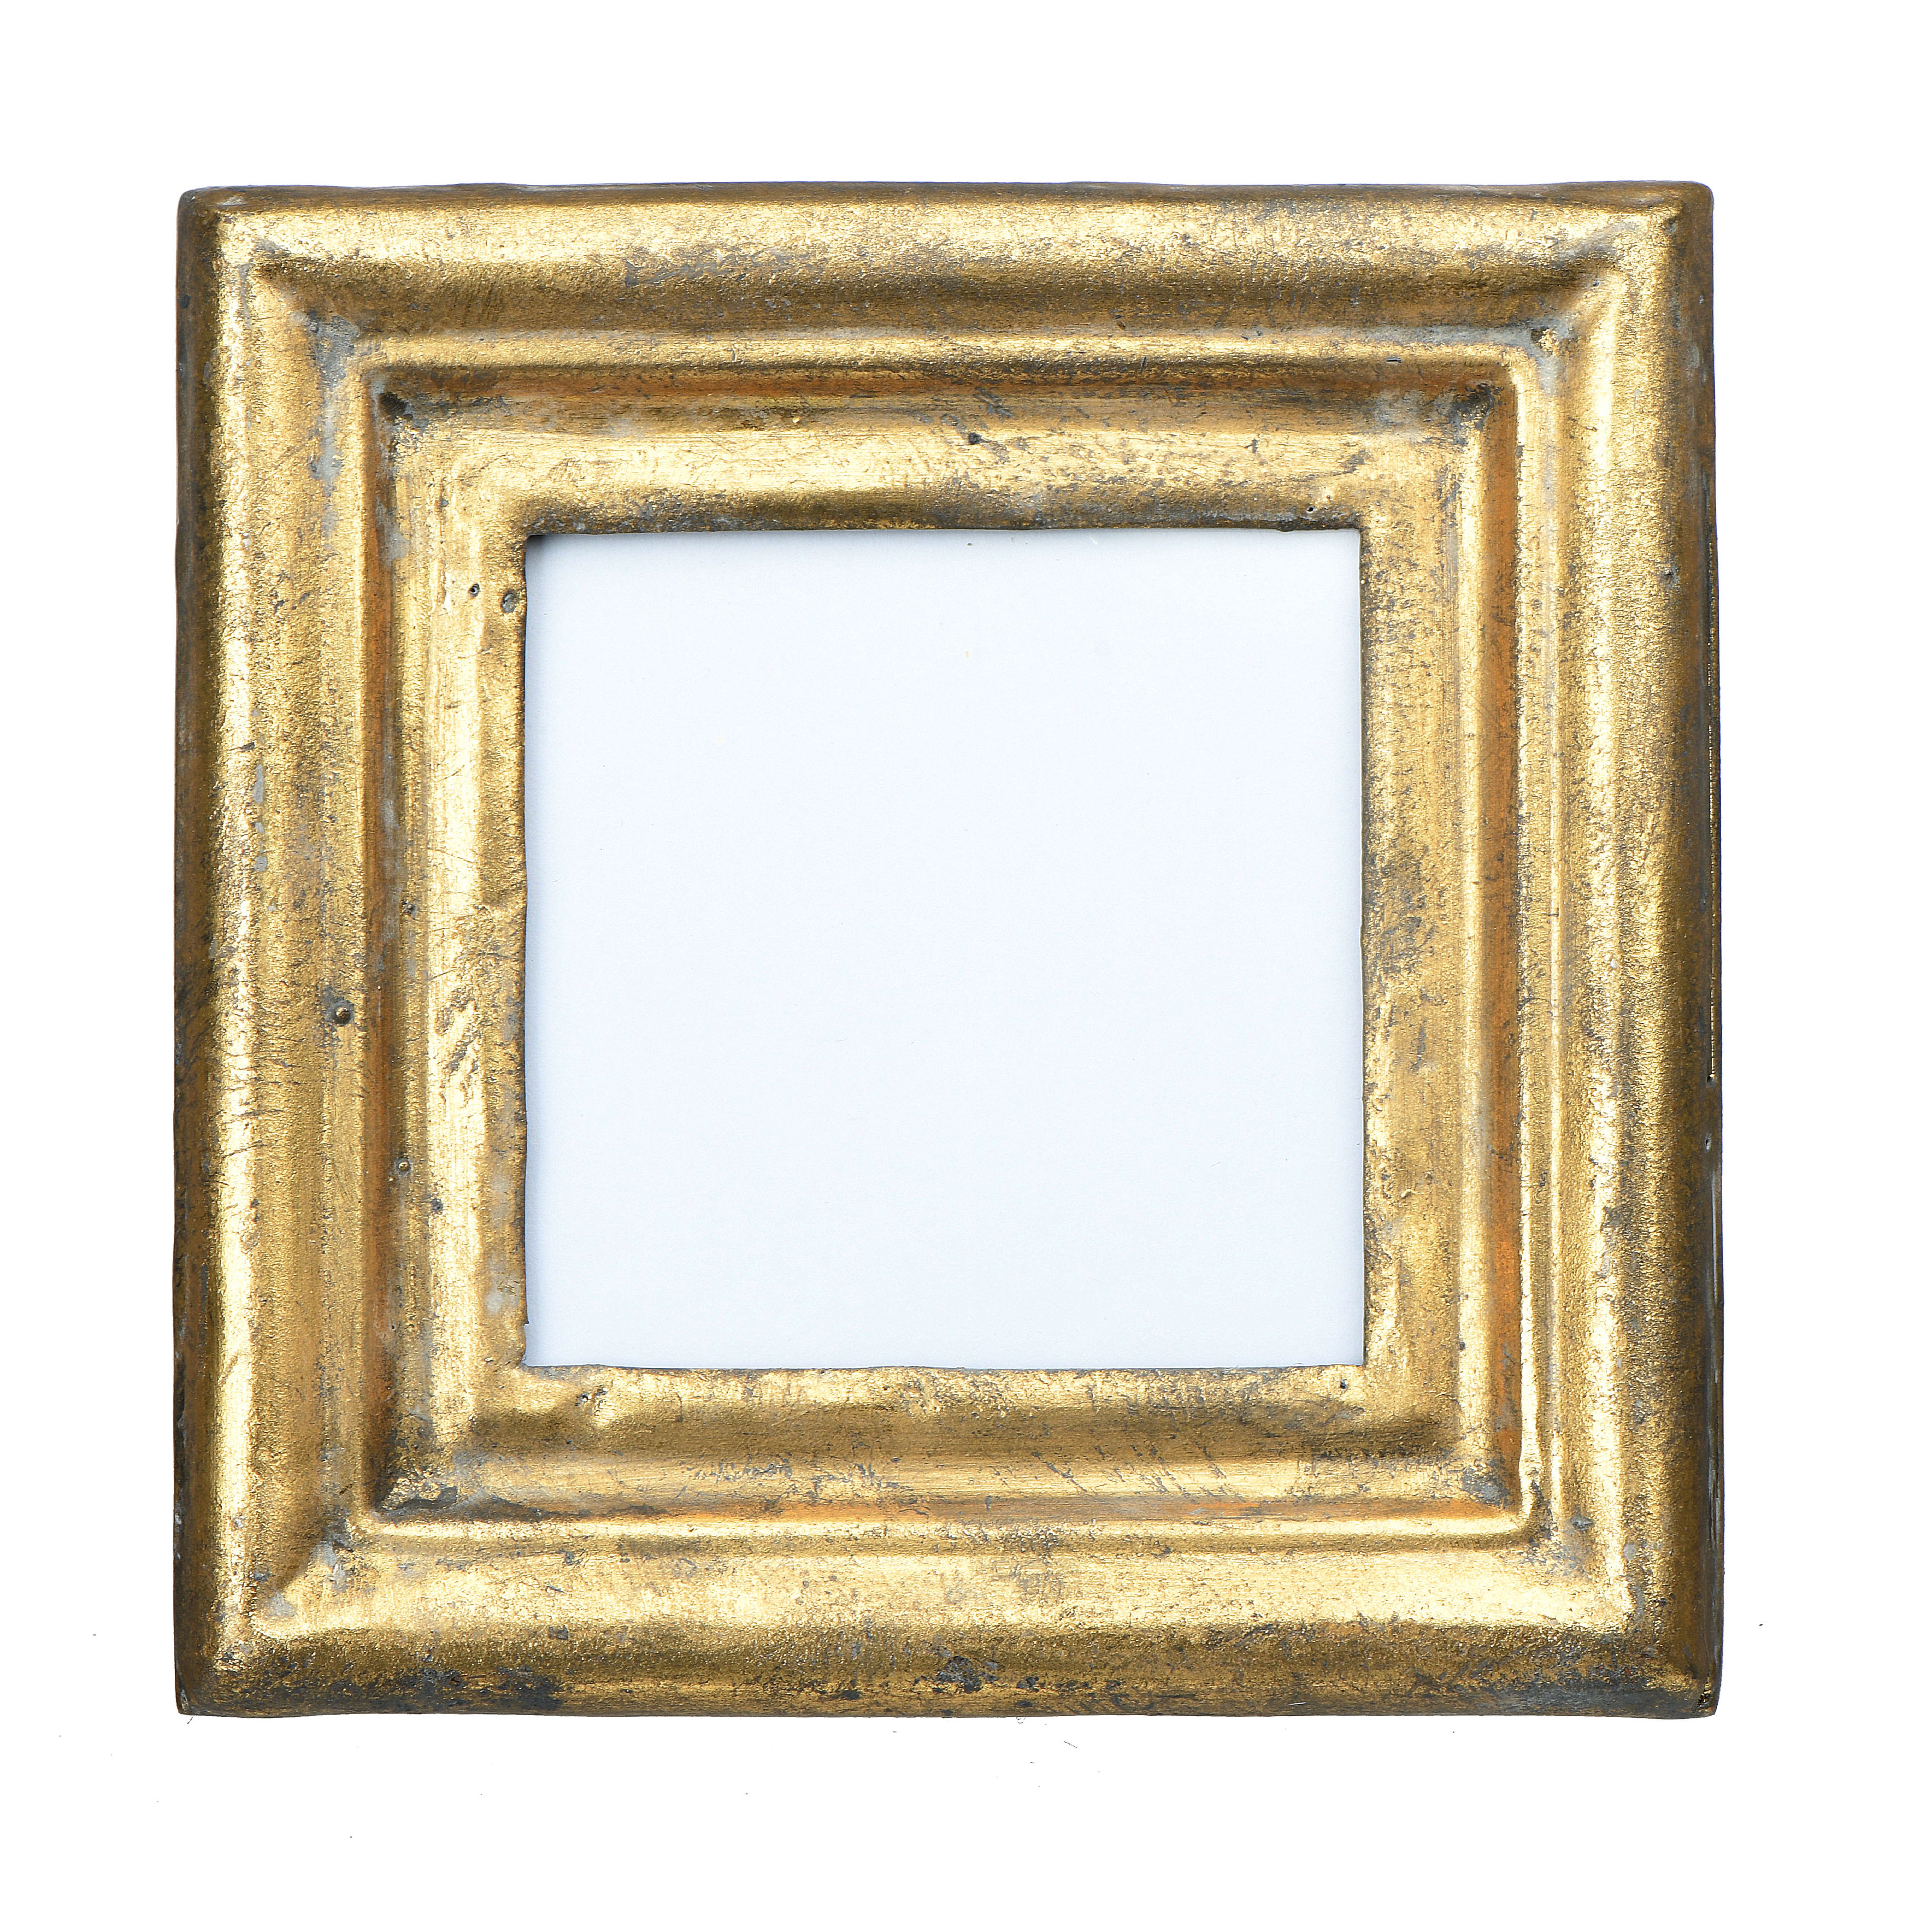 Antiqued Gold Square Picture Frame (Holds 3.5" x 3.5" Photo) - Nomad Home